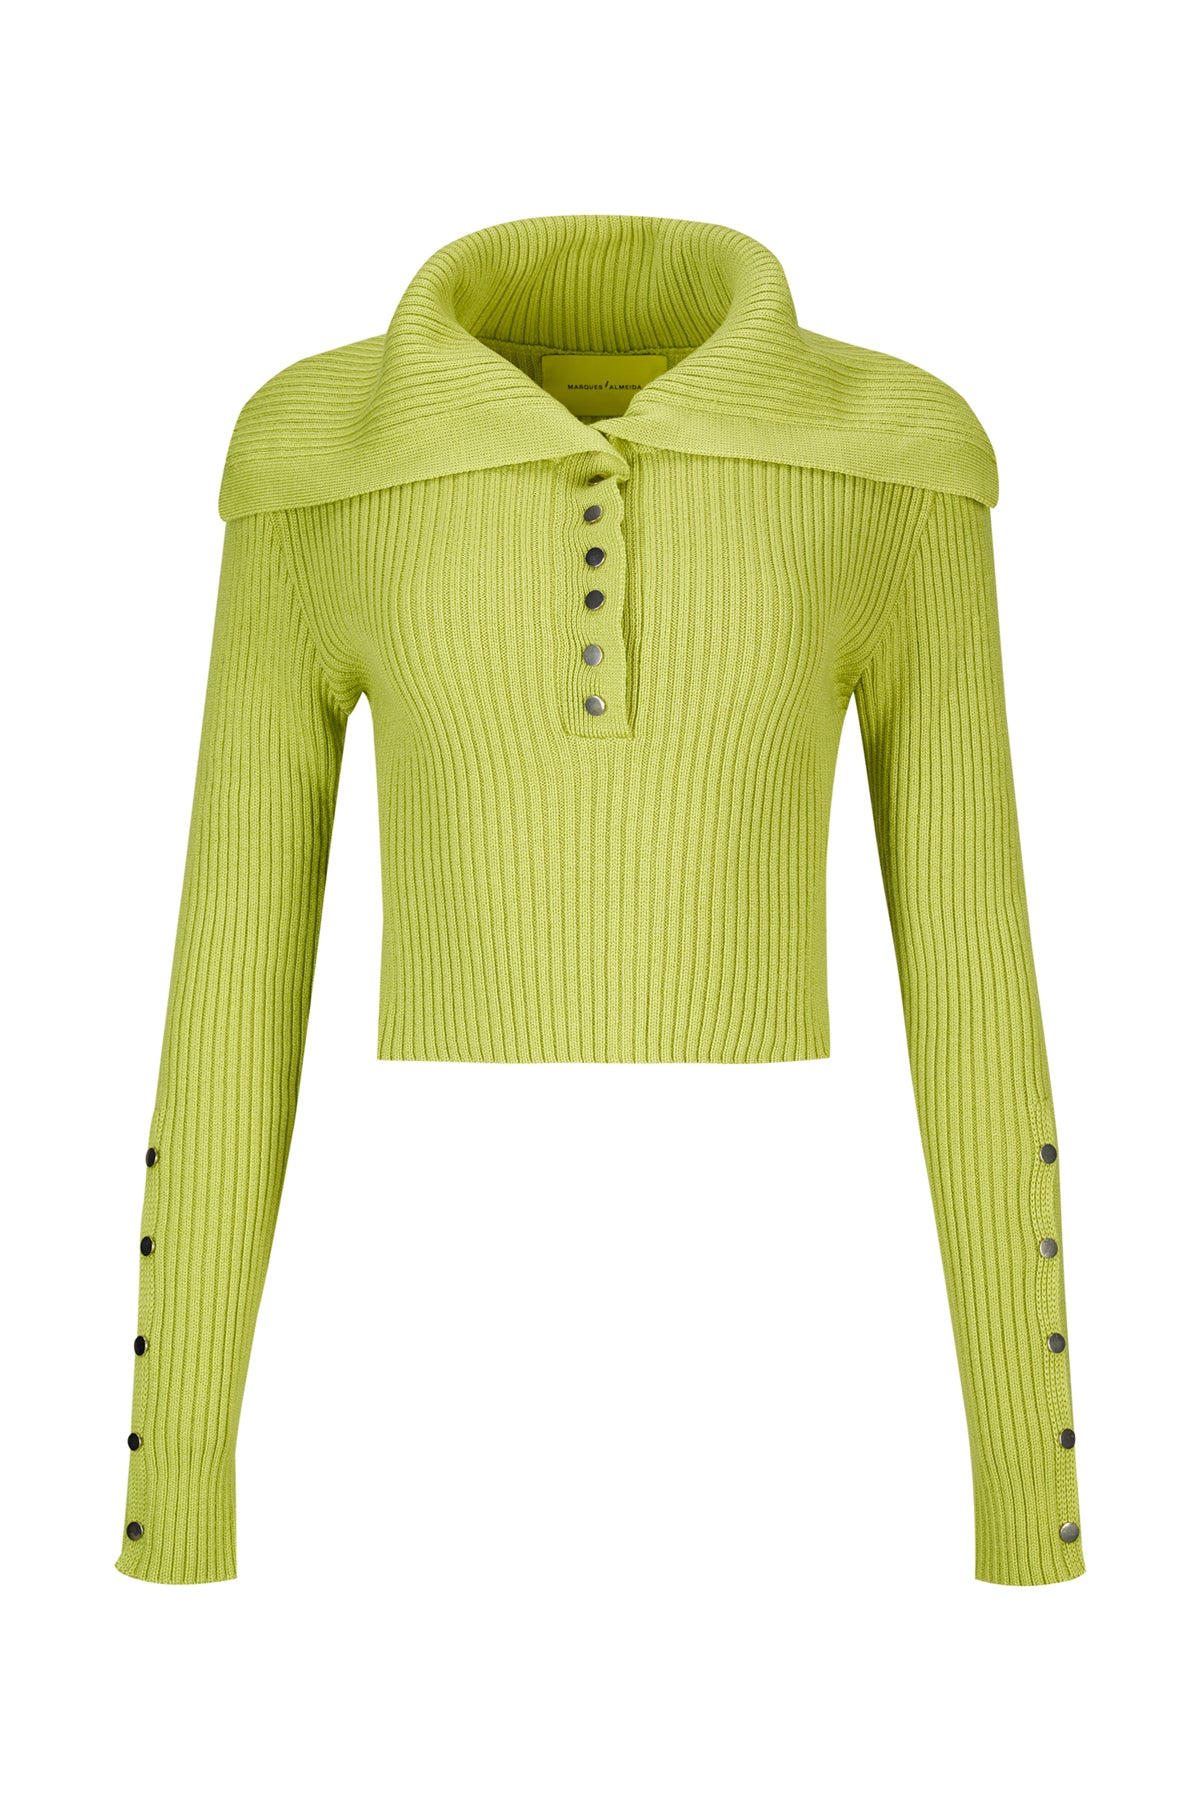 LIME MERINO WOOL KNITTED CROPPED TOP WITH BIG COLLAR